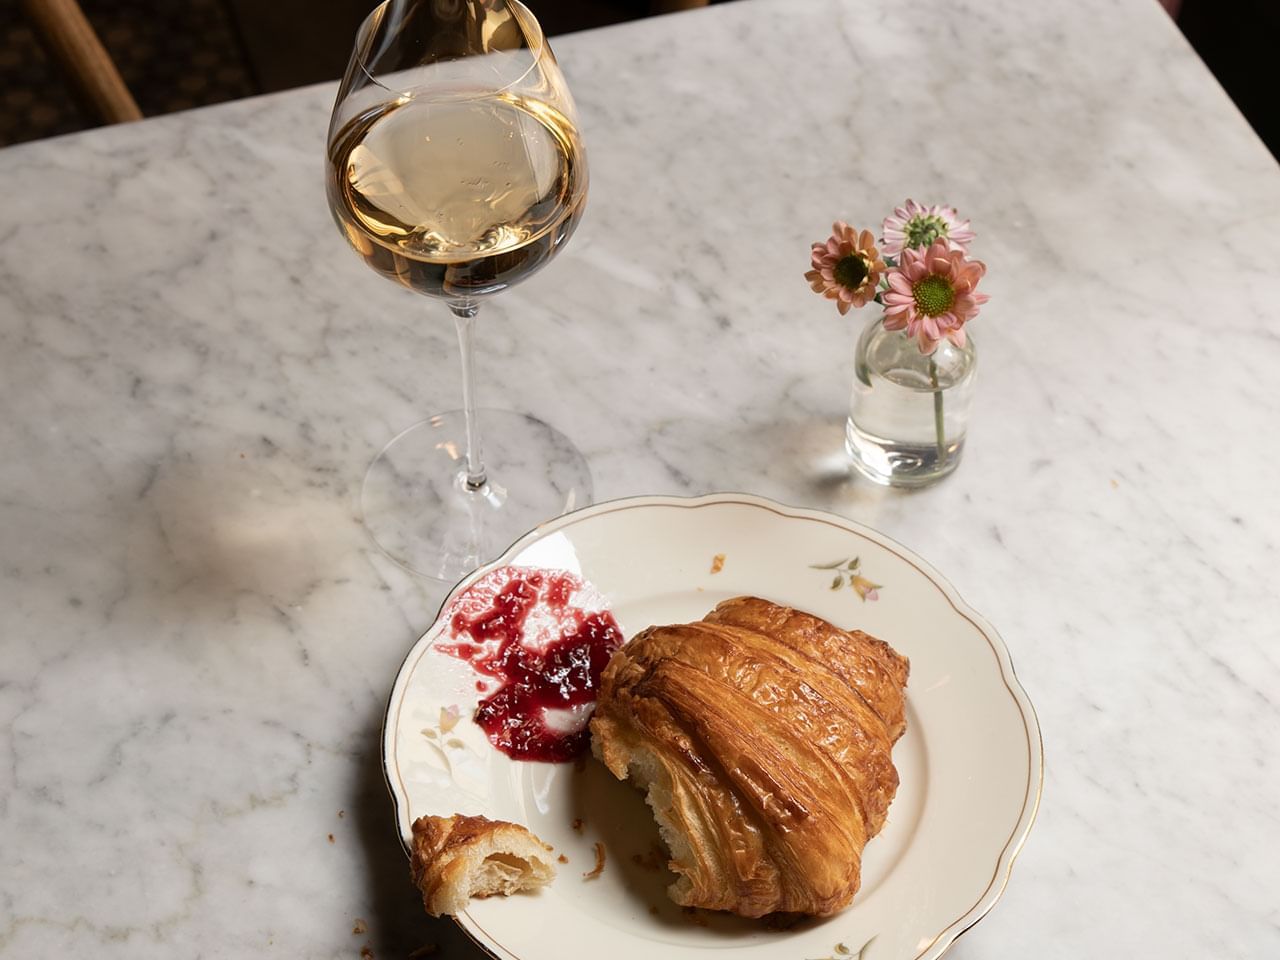 Croissant served with a side of jam & white wine at The Sparrow Hotel